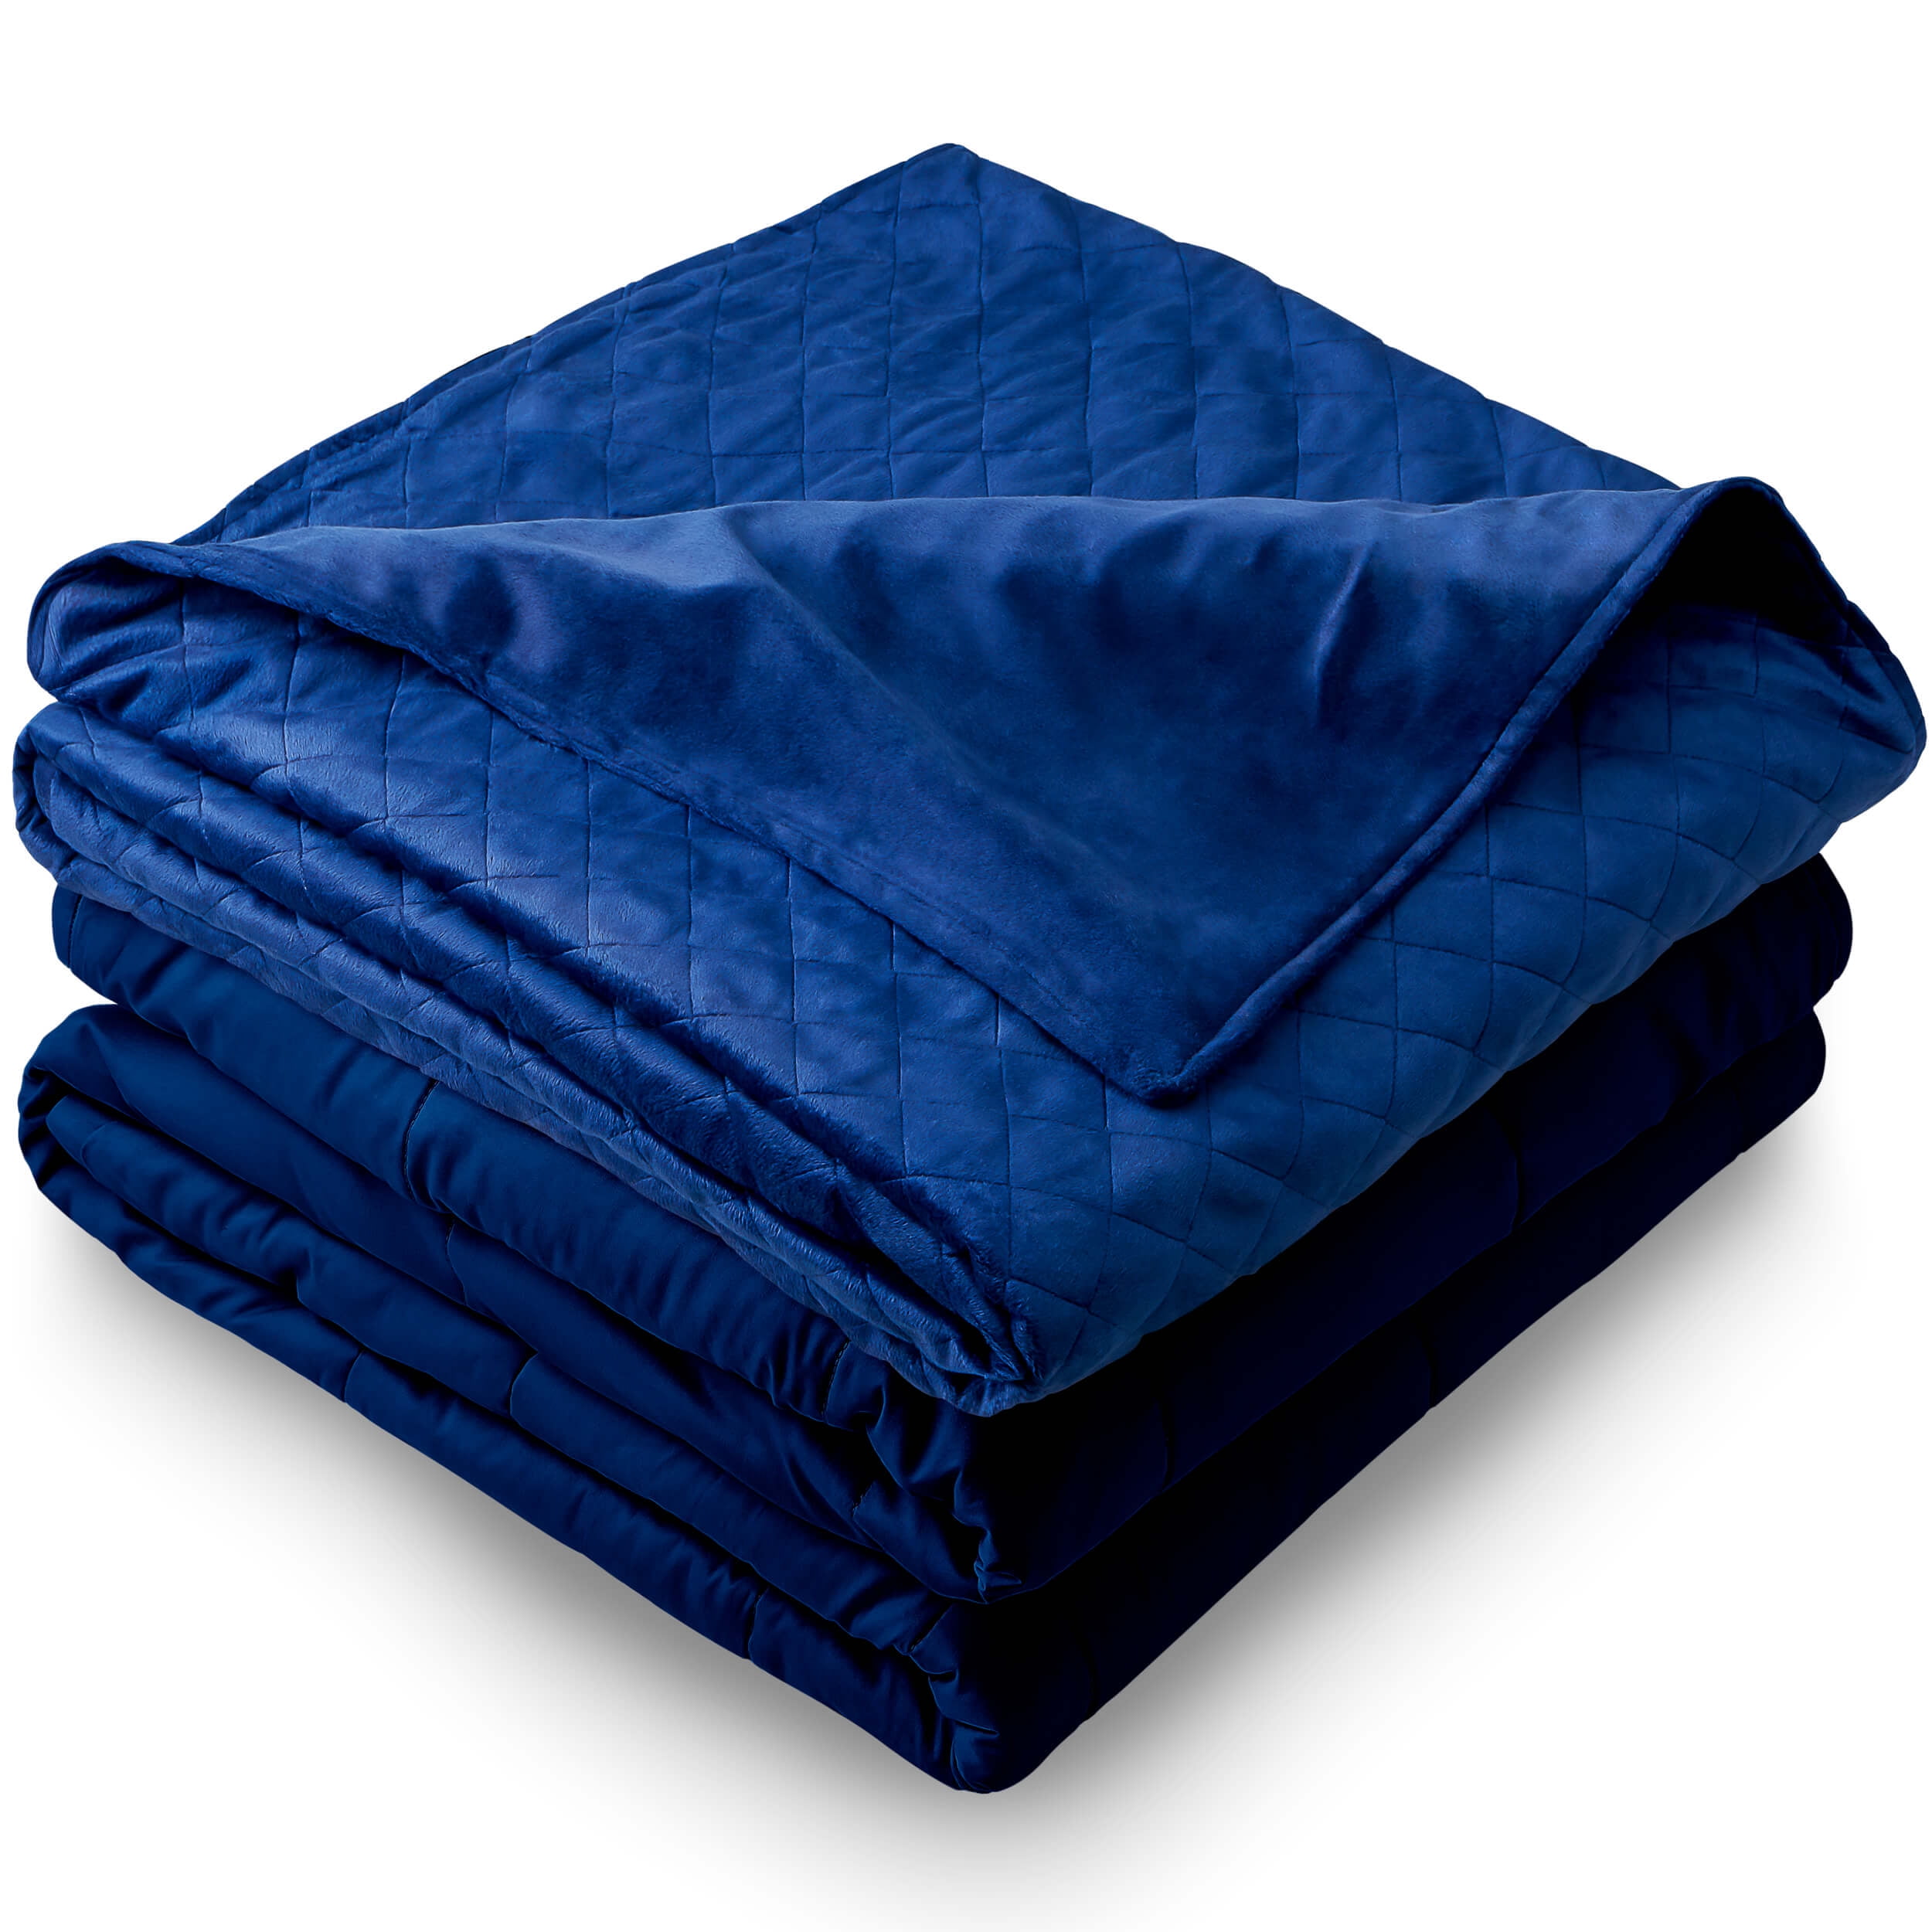 Bare Home Weighted Blanket with Duvet Cover (60"x80", 17lb, Blue / Blue